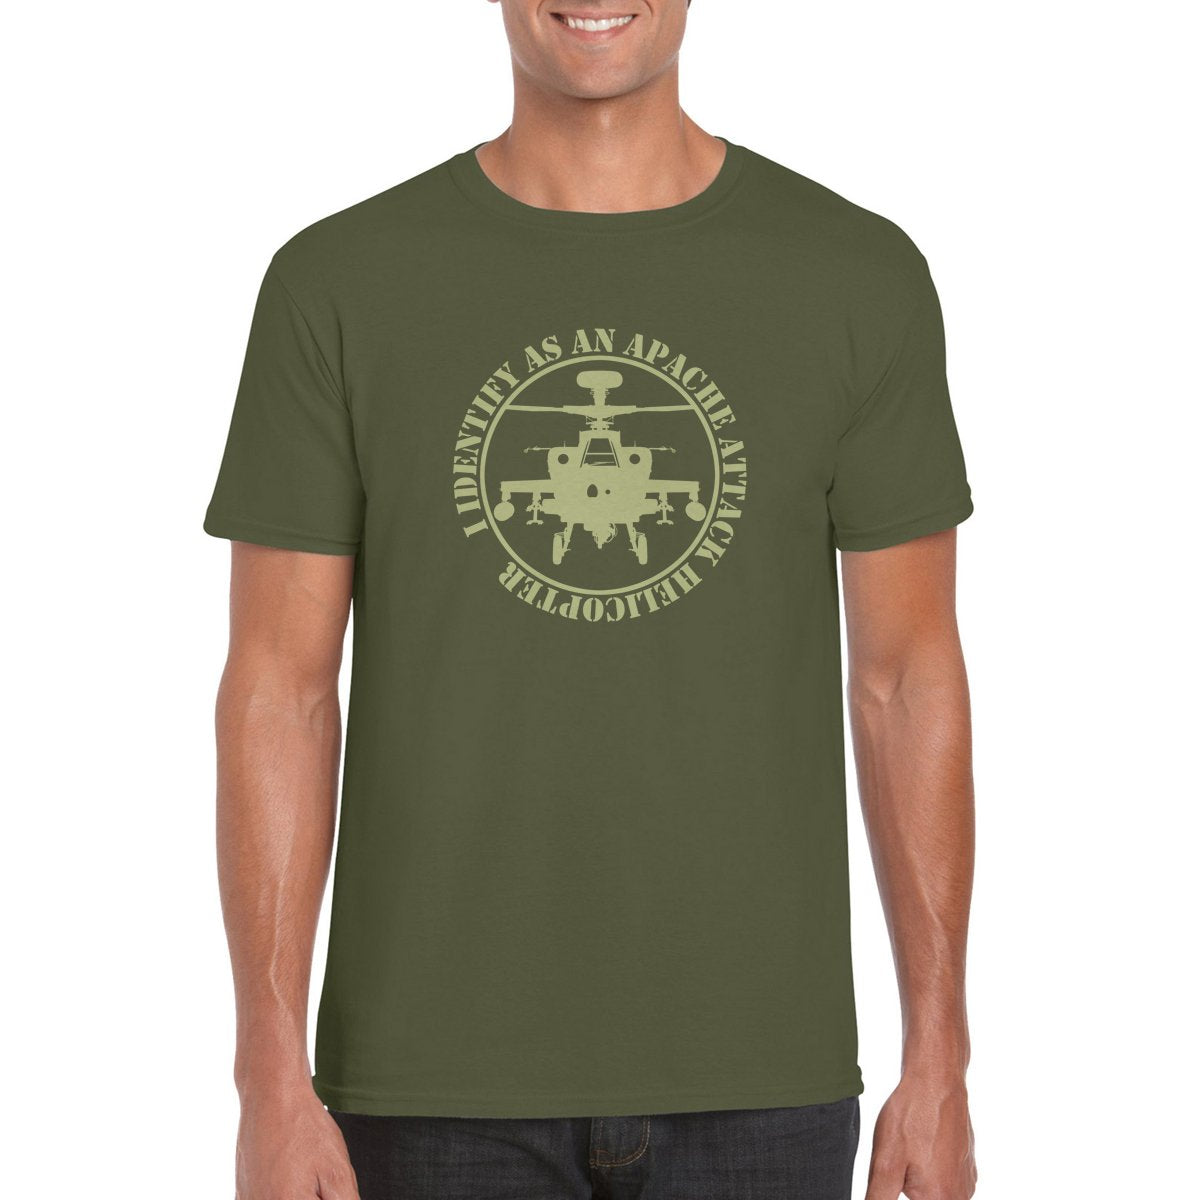 I IDENTIFY AS AN APACHE ATTACK HELICOPTER T-Shirt